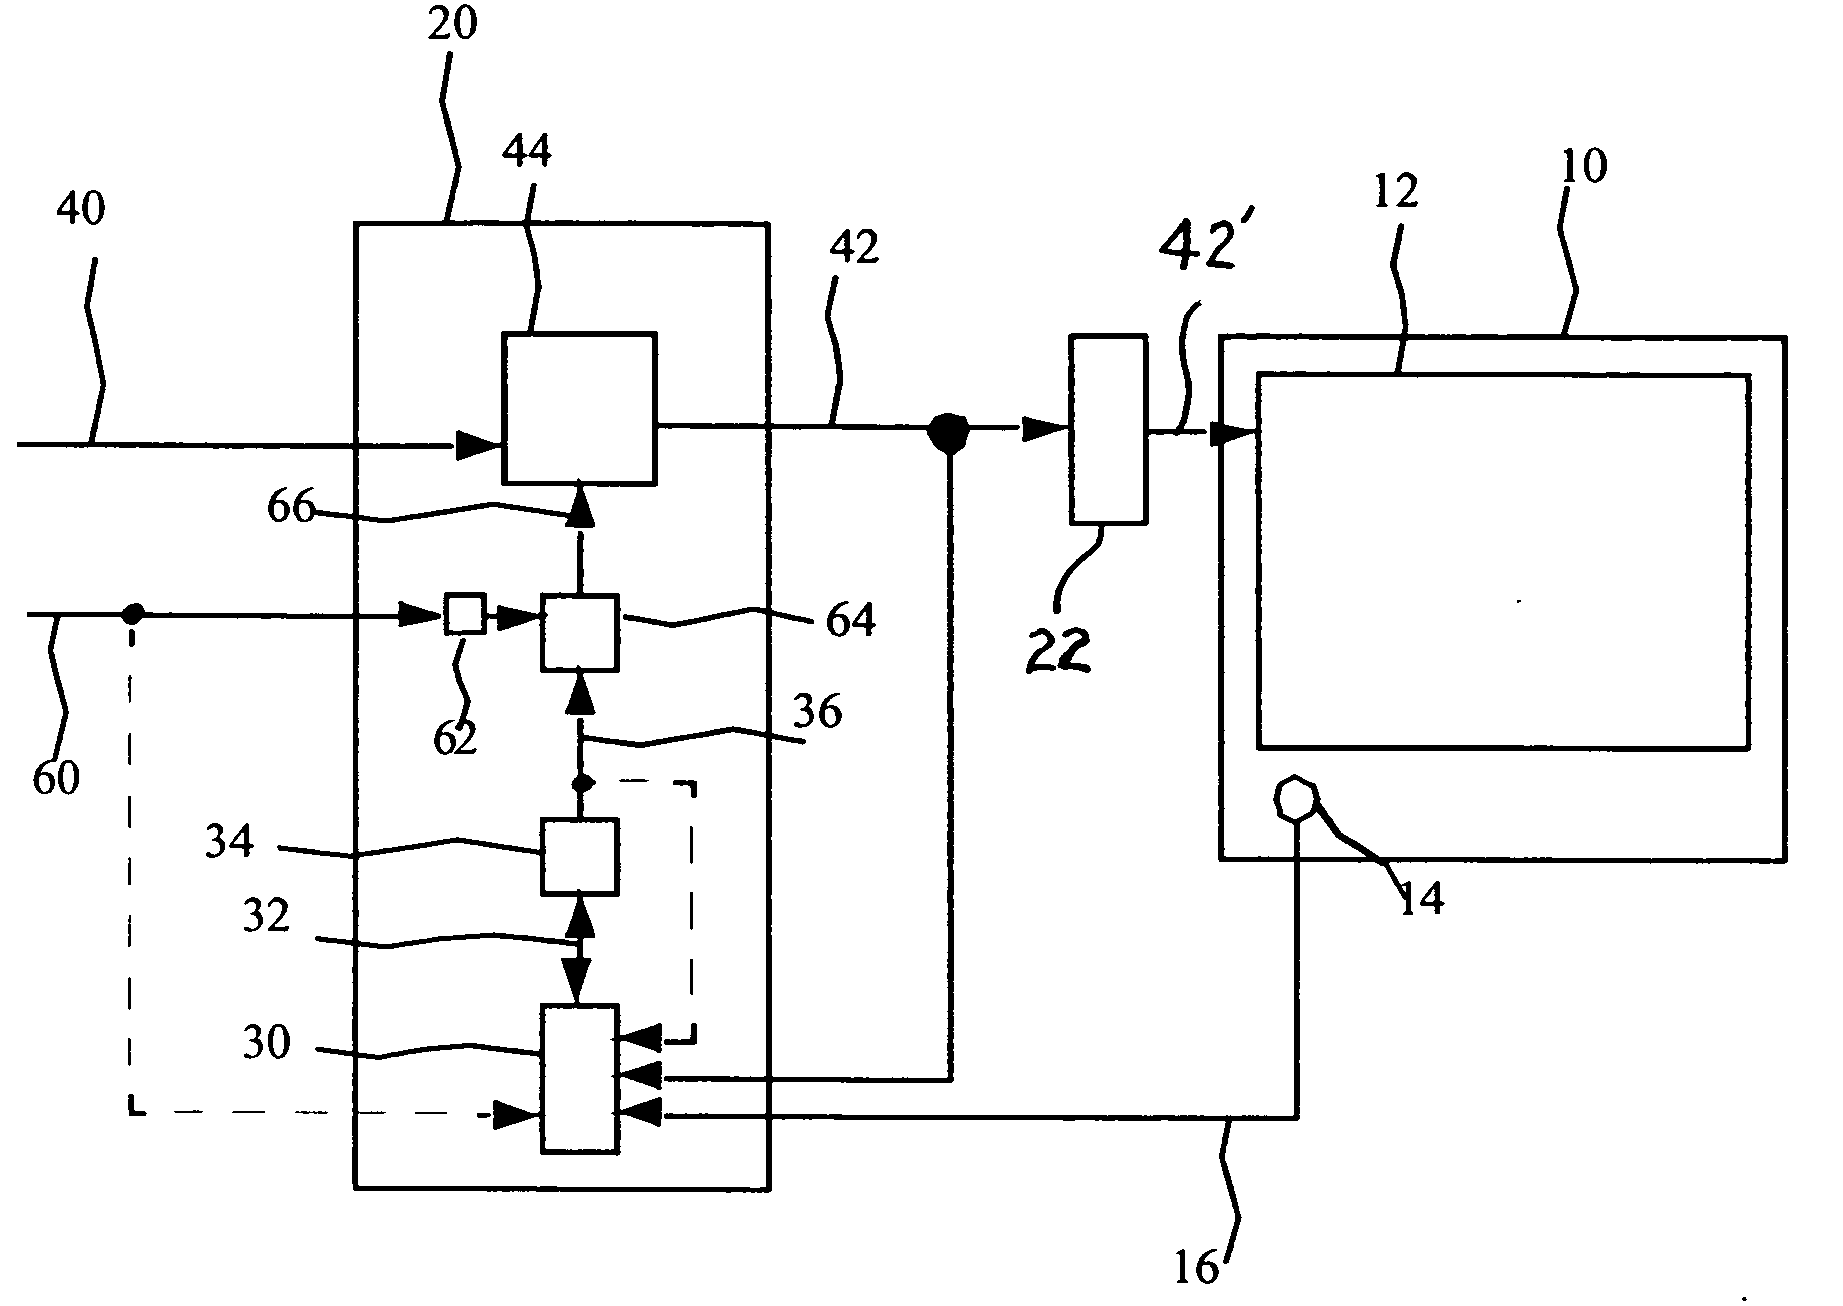 System for controlling an OLED display